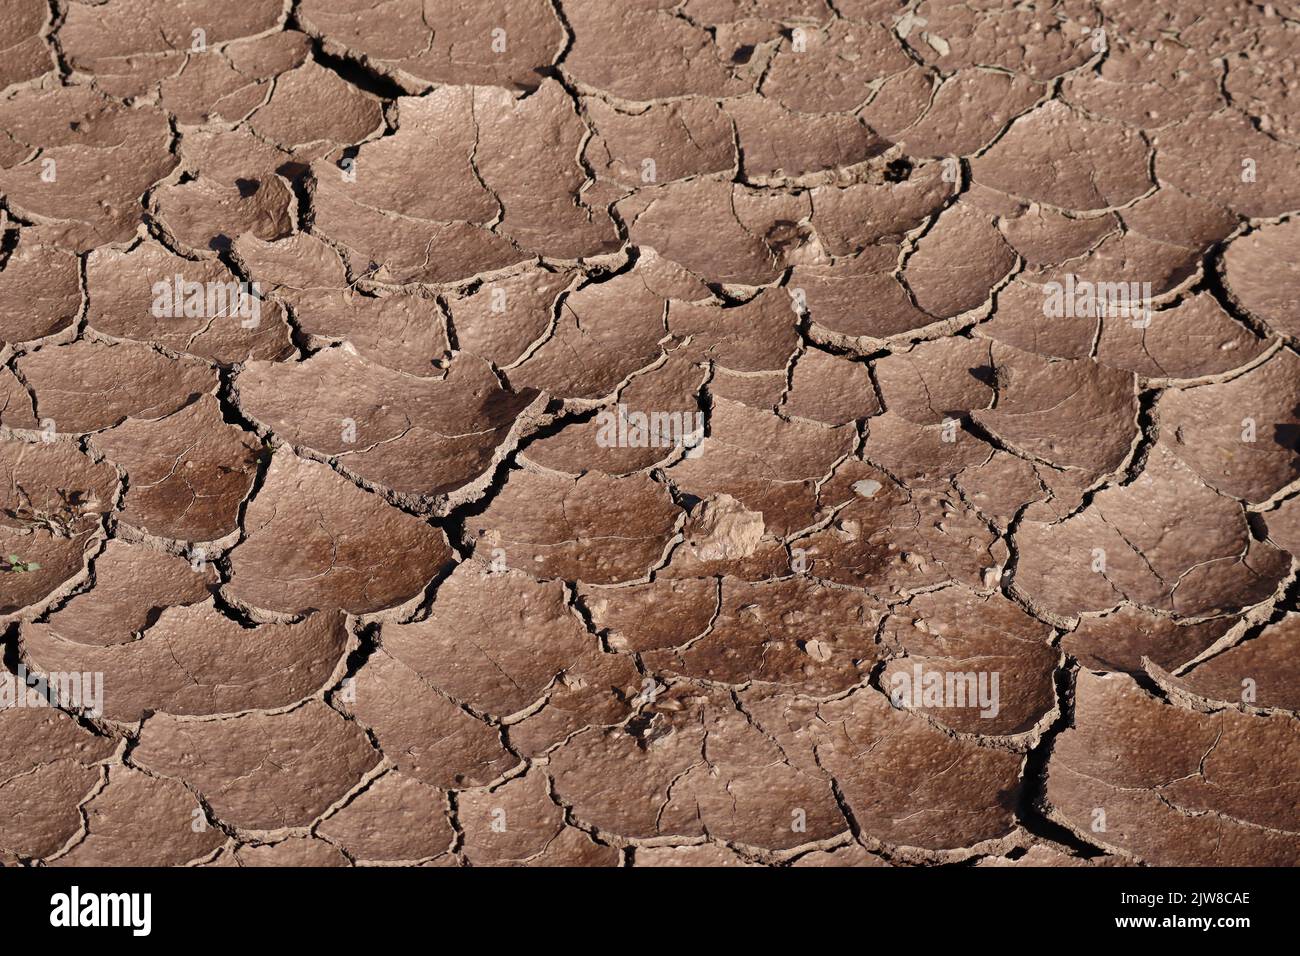 Stress cracks in a fresh Puddle Stock Photo